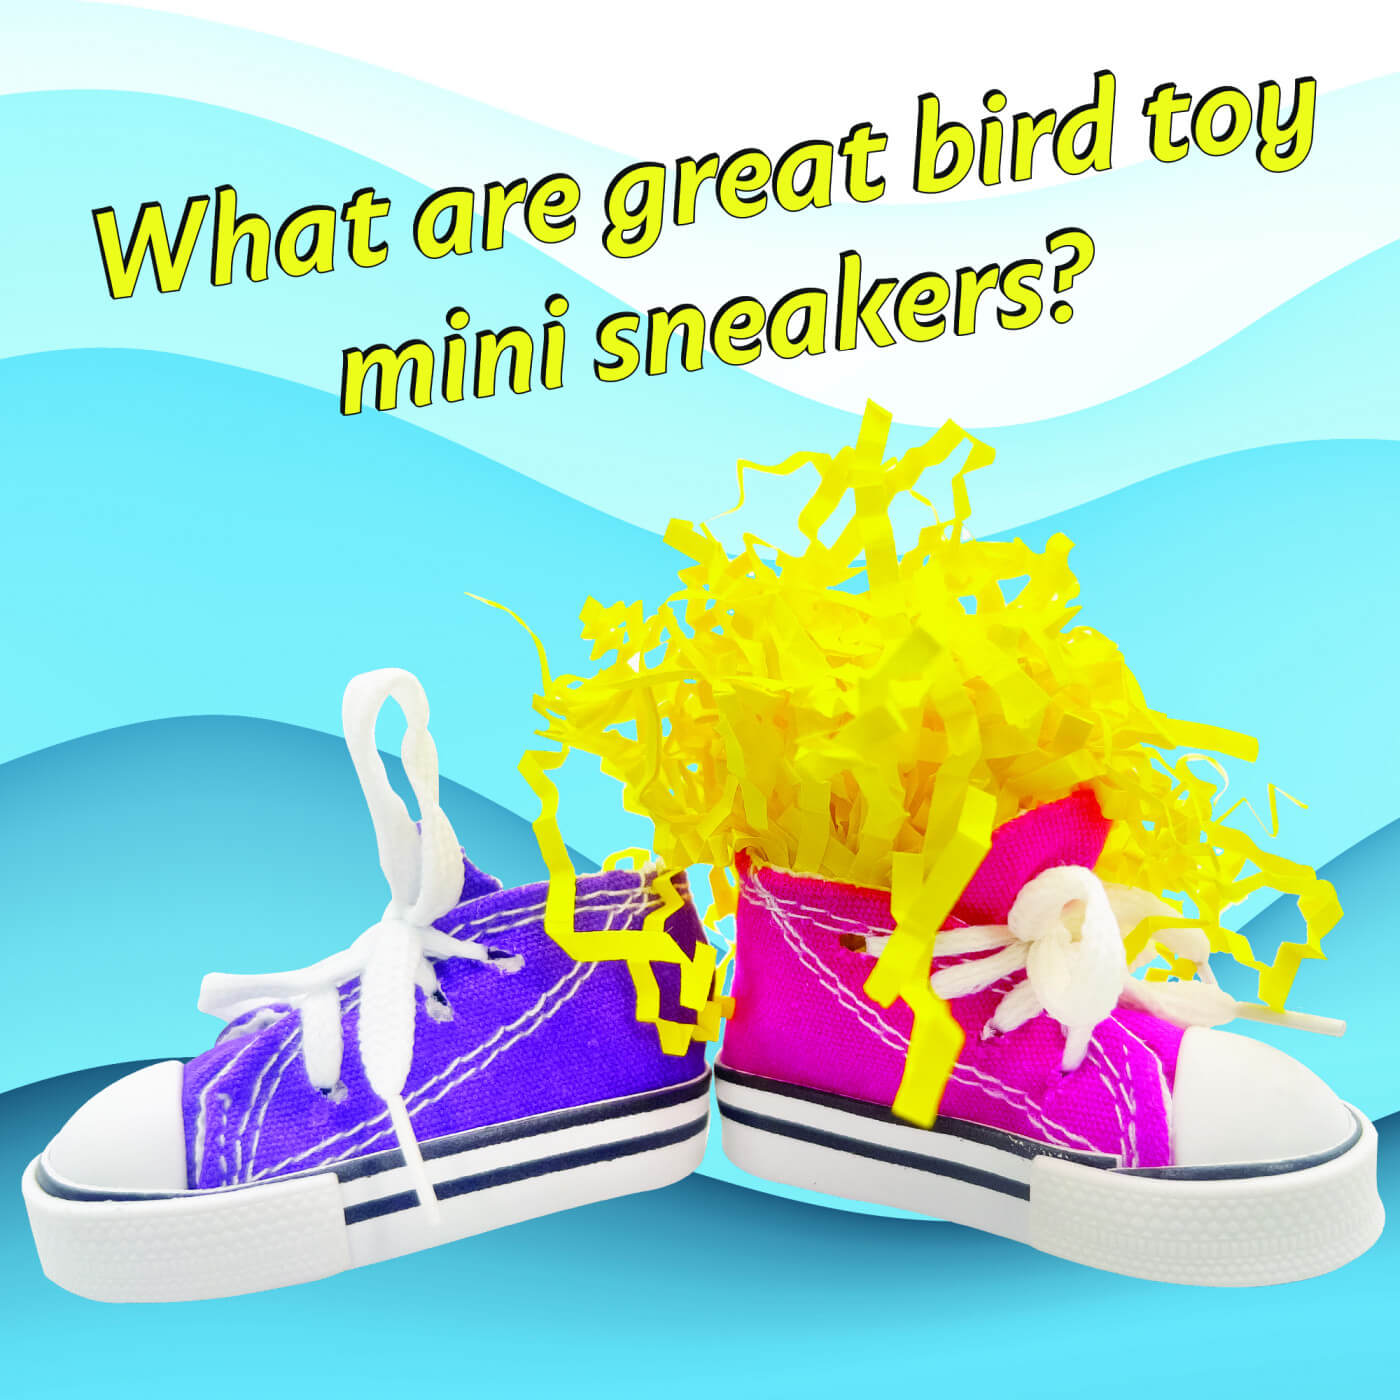 What are great bird toy mini sneakers?